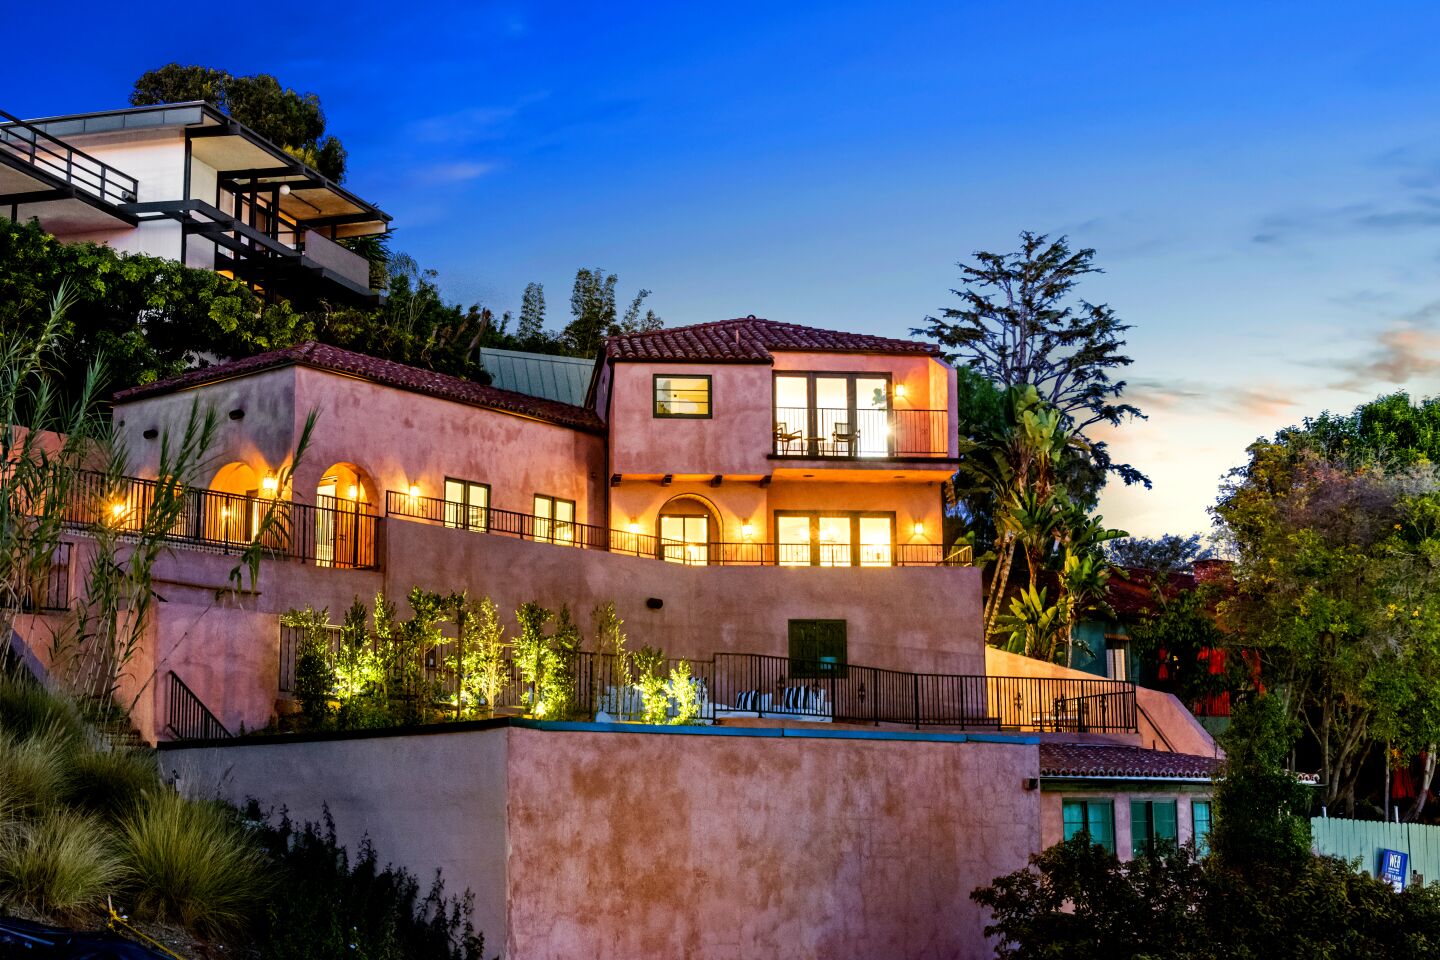 The house overlooks the Comedy Store from its perch in the Hollywood Hills.